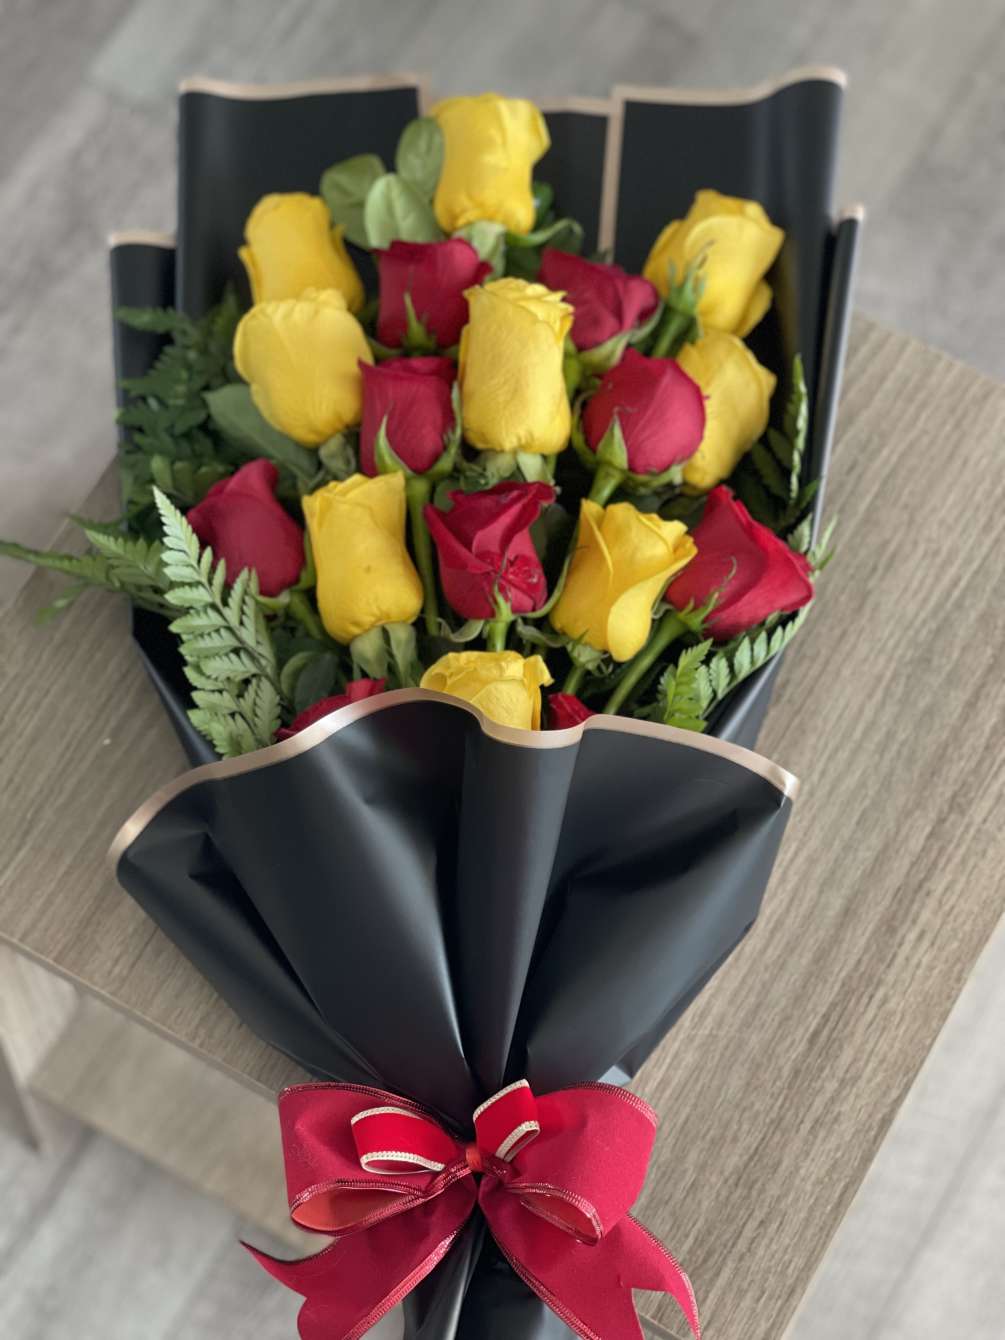 Brightful bouquet of 18 long stem red and yellow roses, leather leaves